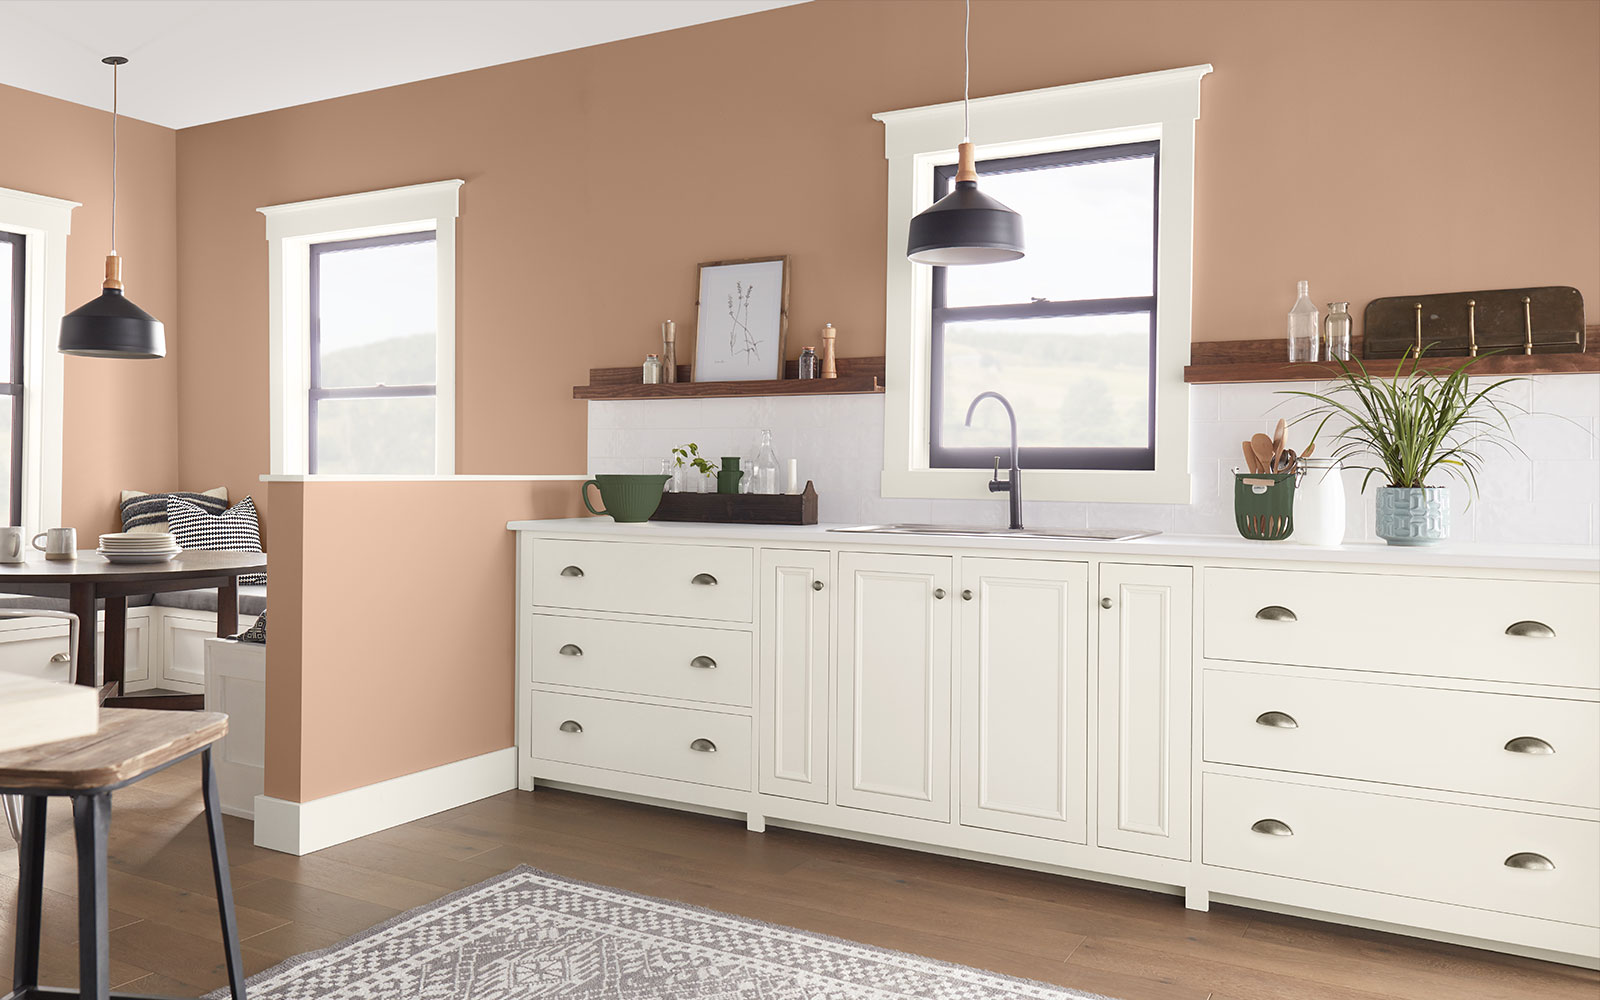 A kitchen image with three color swatches sitting beside it. The image displays the three colors: a dusty orange hue is used for the wall, a creamy white hue is used for the cabinets, and a dark green hue represents the plants sitting on the counters.